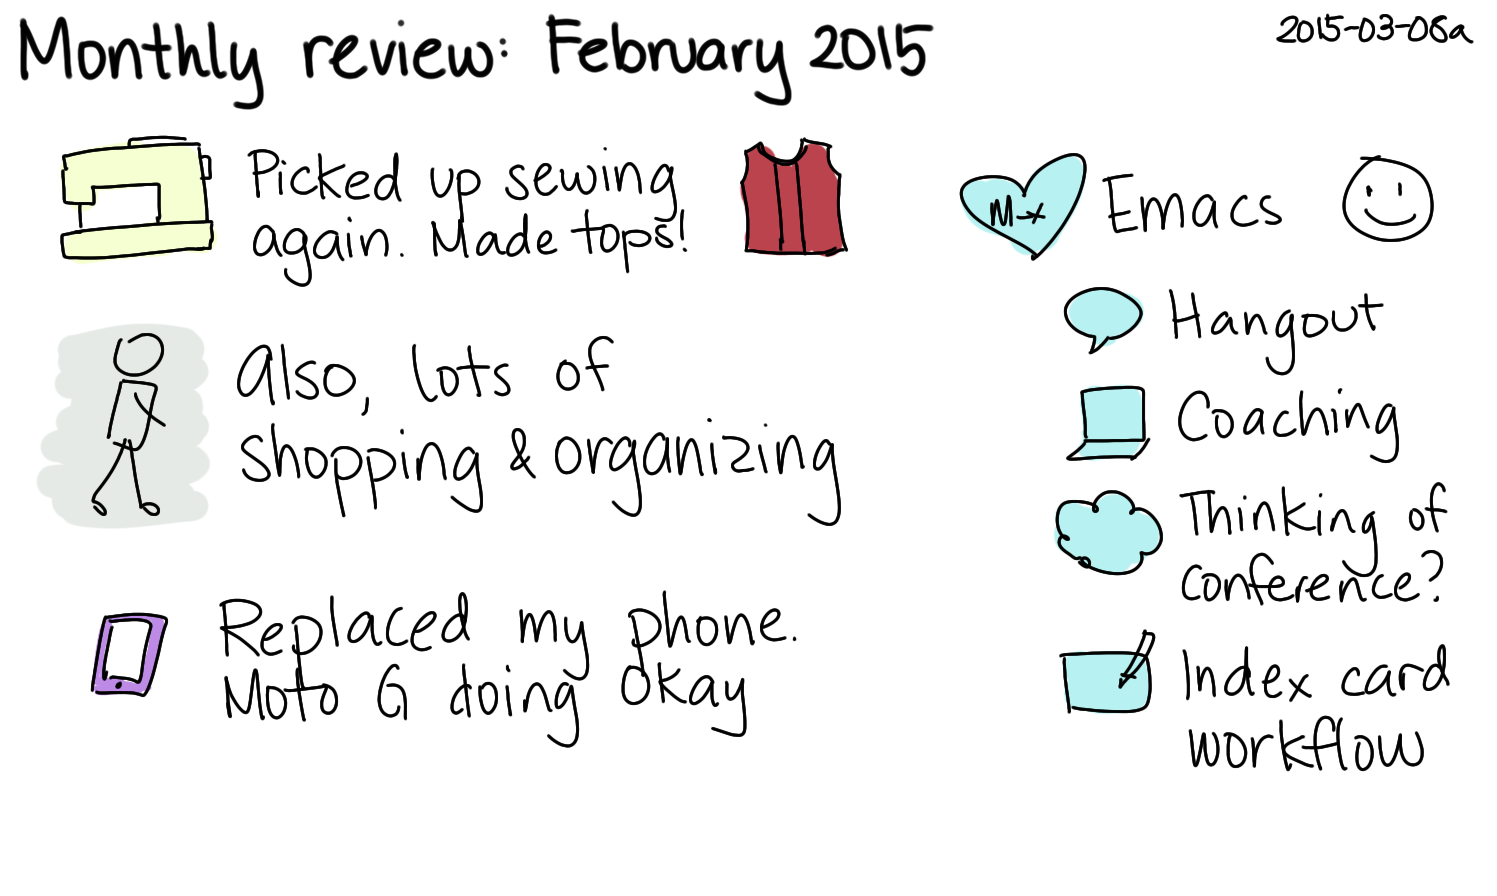 2015-03-08a Monthly review - February 2015 -- index card #monthly